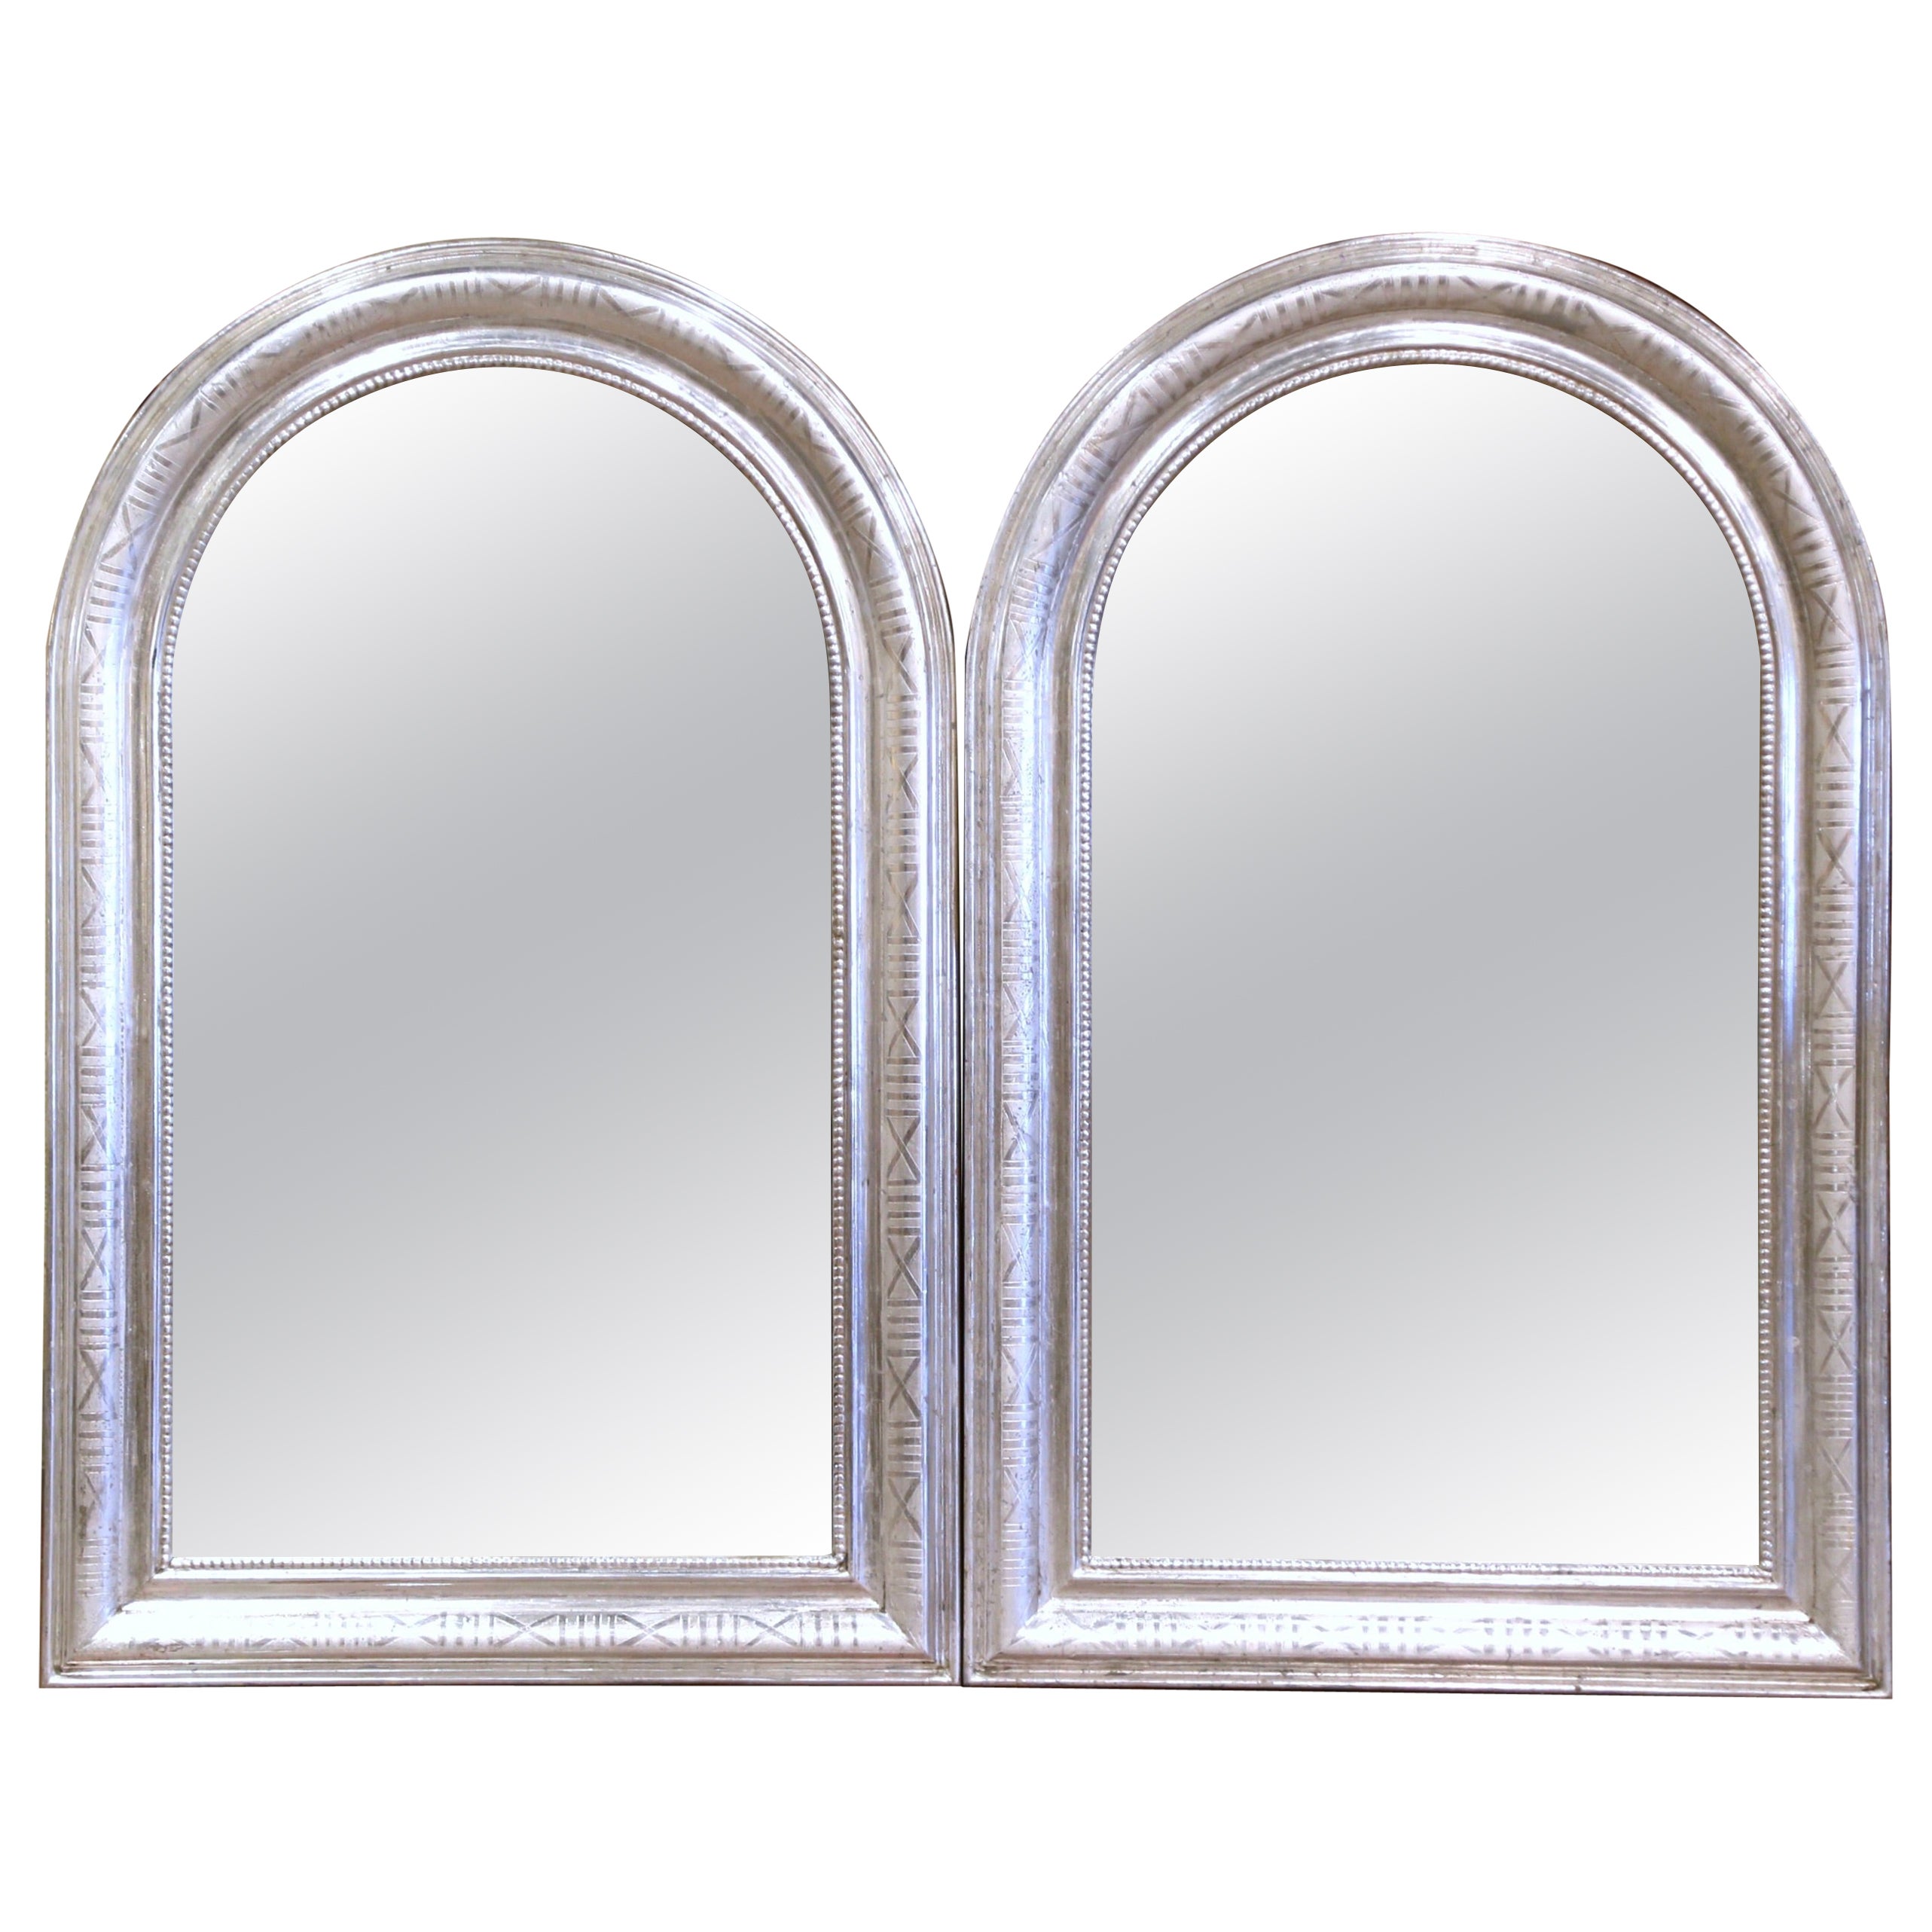  Pair of French Louis Philippe Silver Leaf Wall Mirrors with Engraved Motifs For Sale